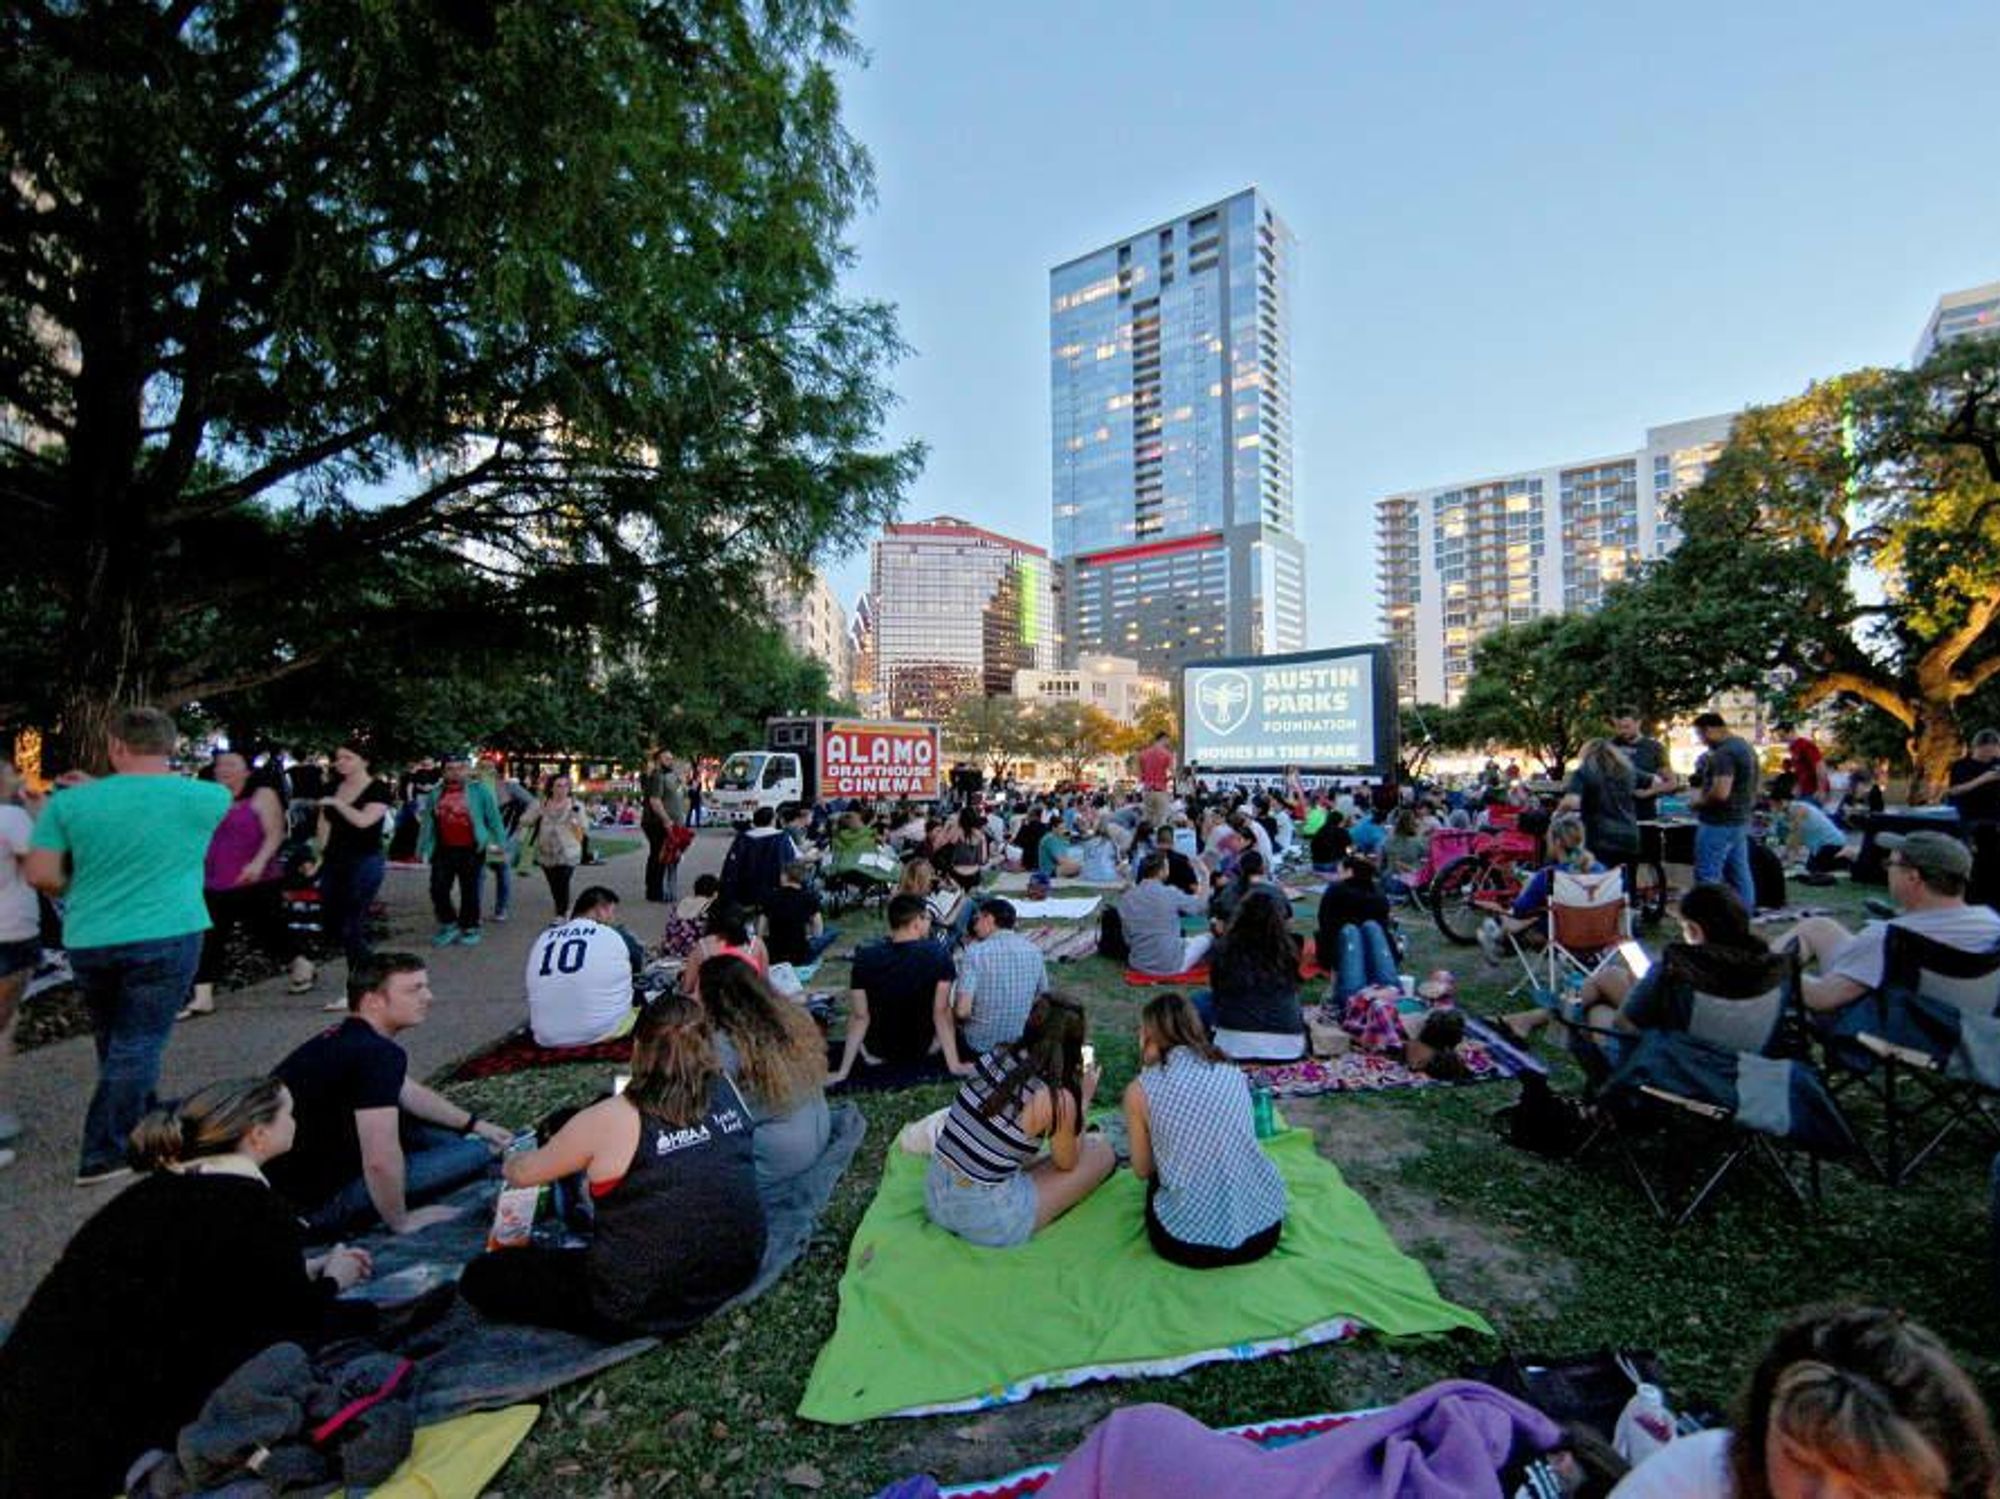 Movie-goers lay out blankets at the park to watch a film in front of the Austin skyline.